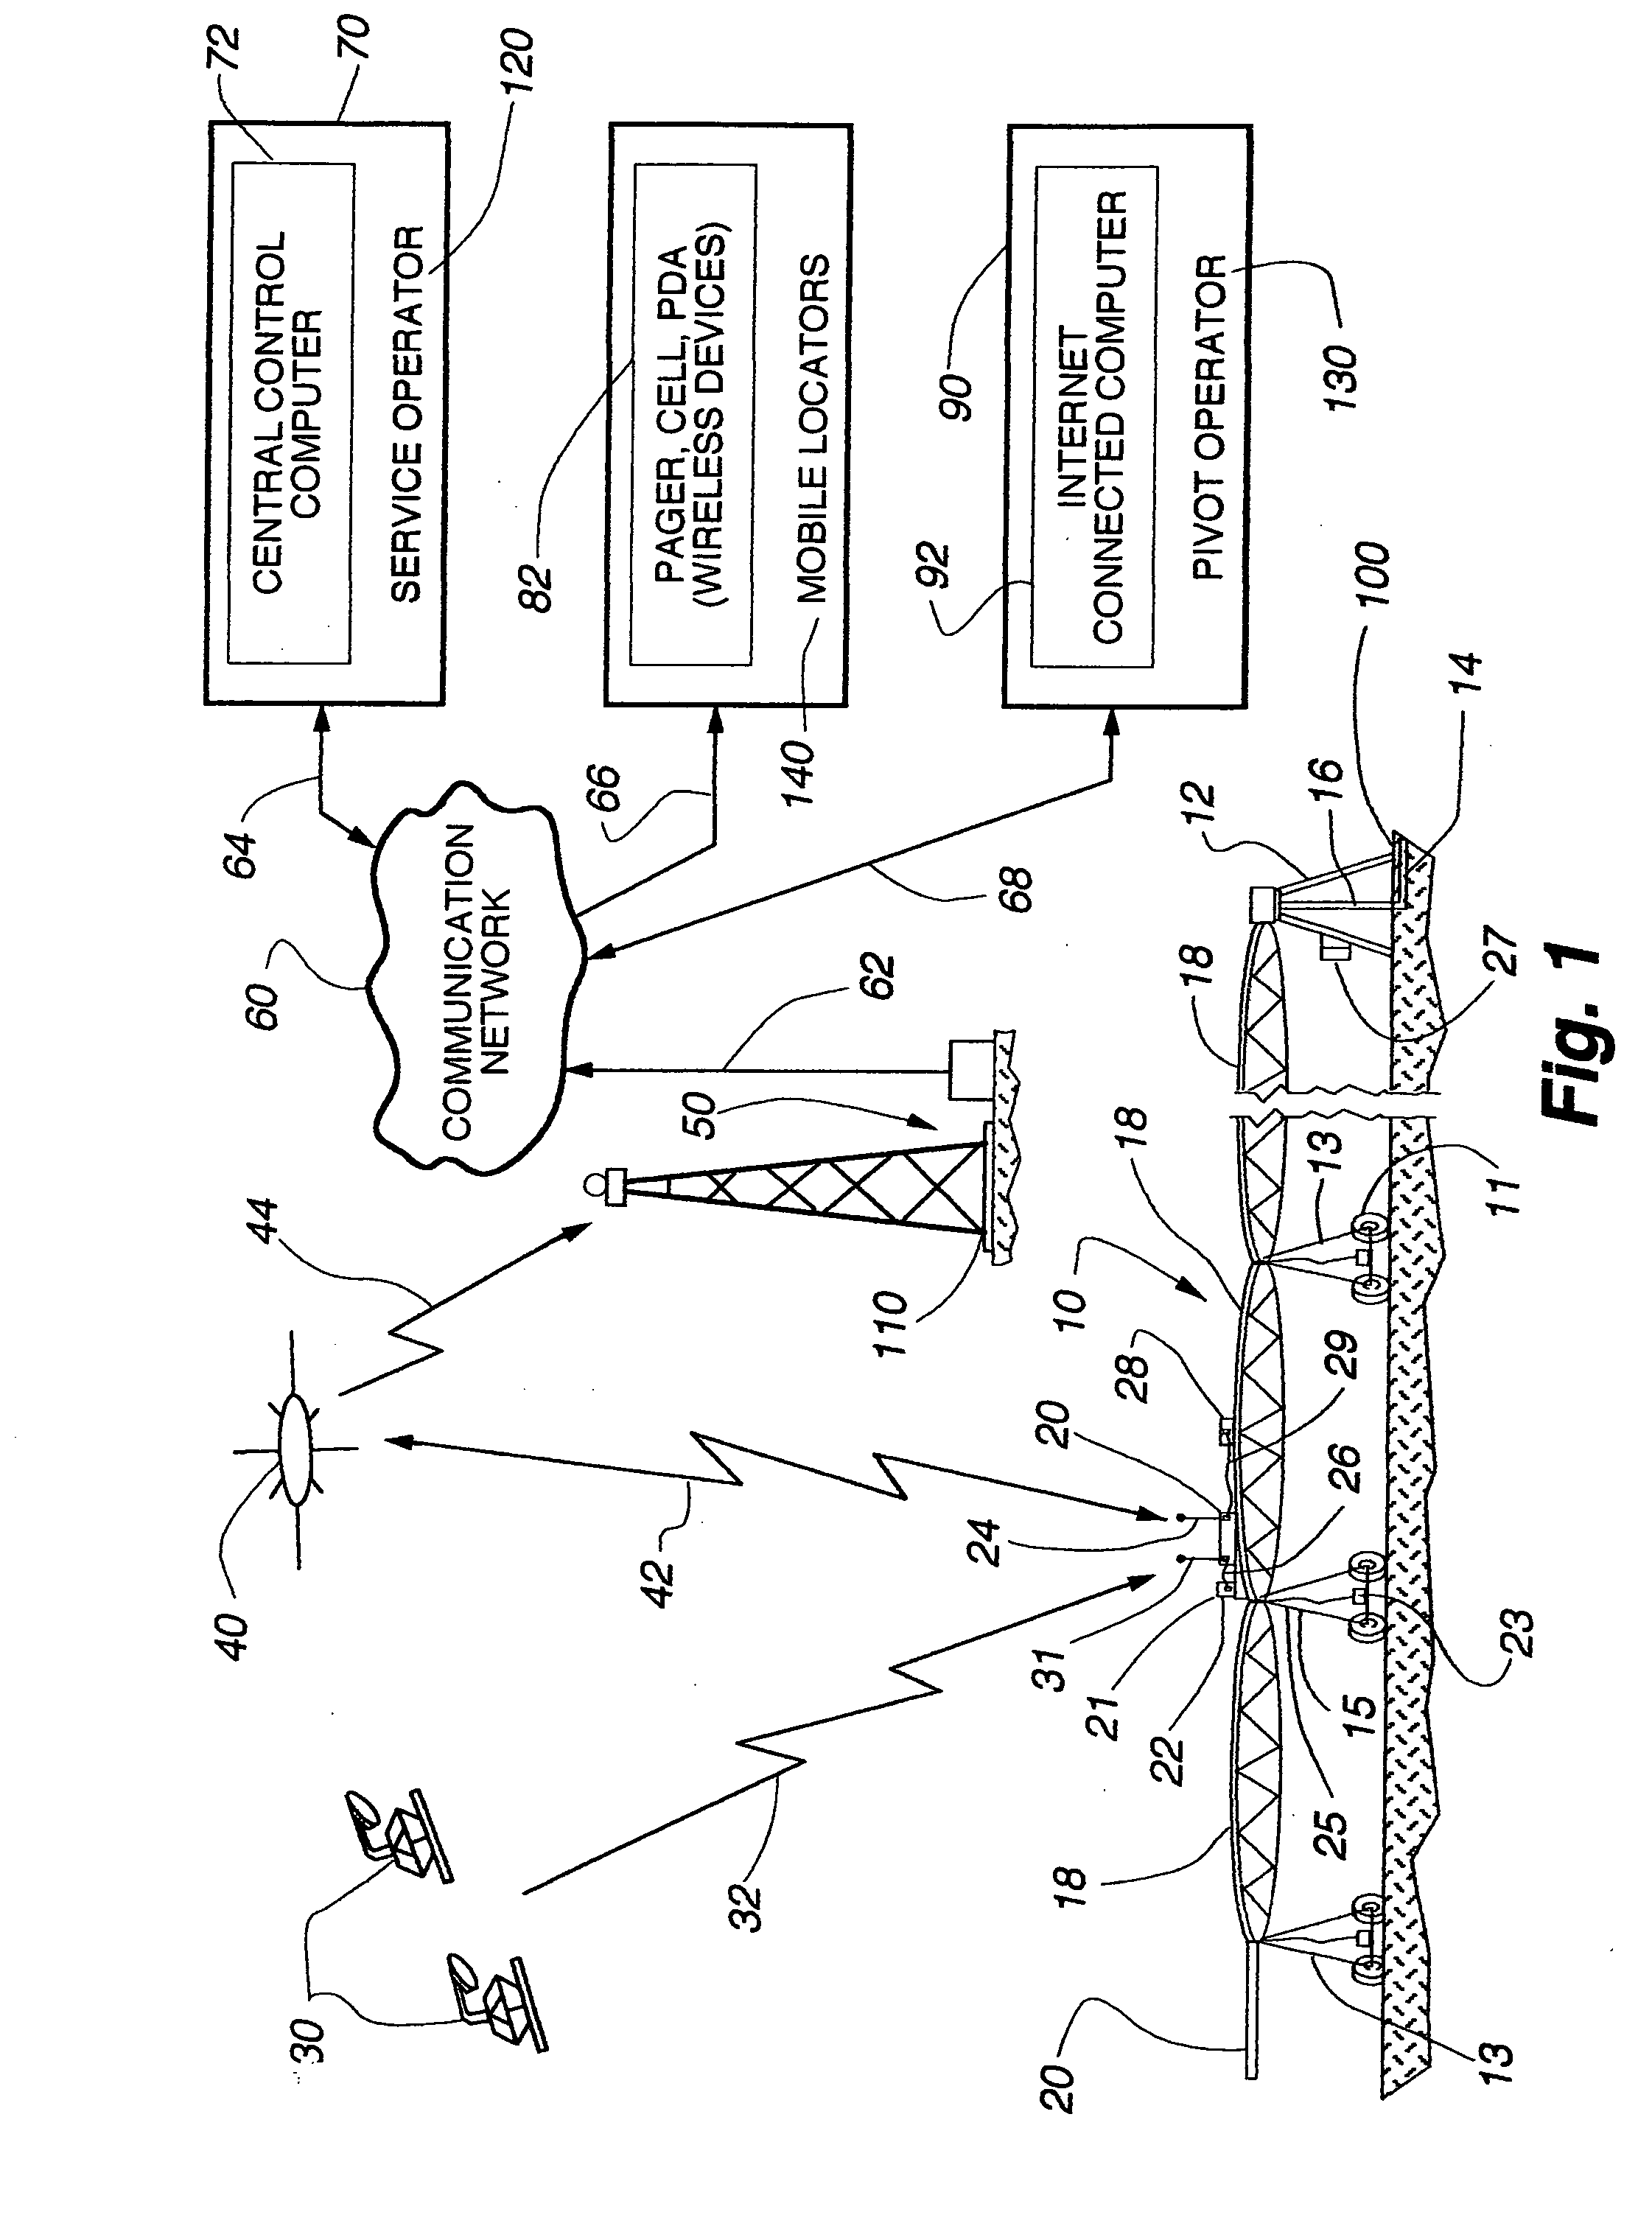 Remote current sensor monitoring system and GPS tracking system and method for mechanized irrigation systems